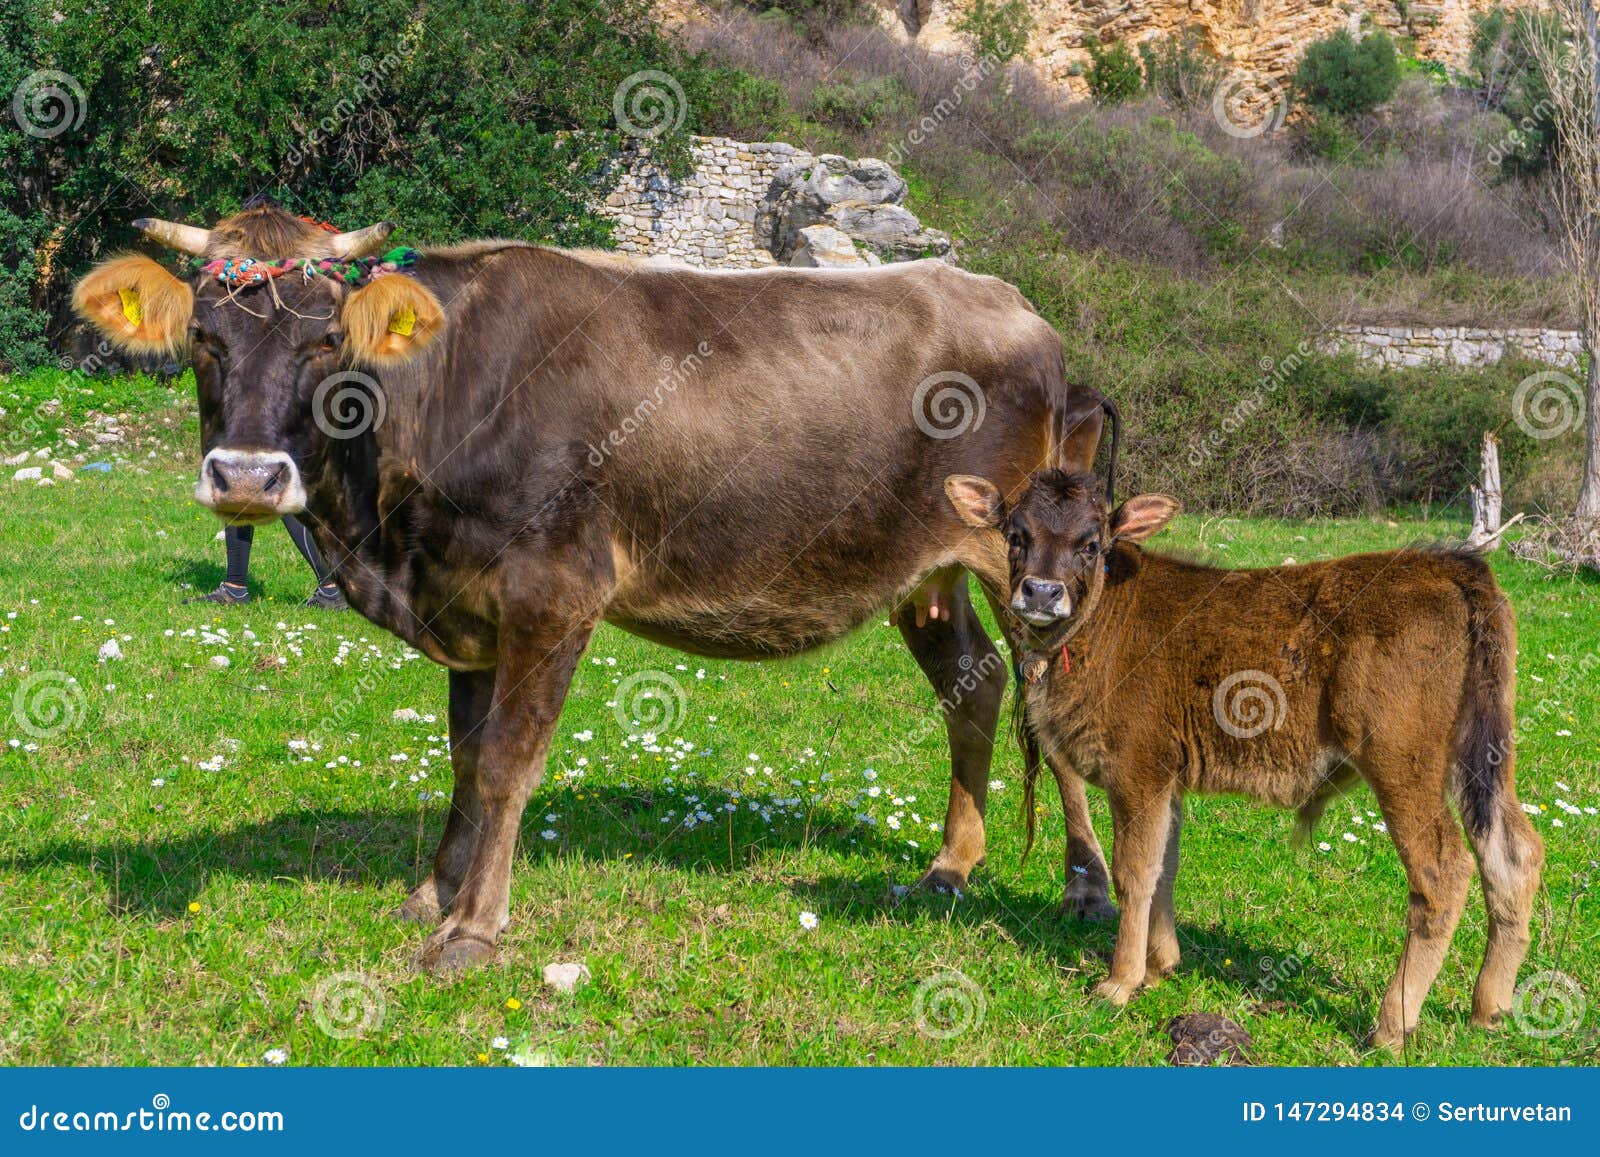 newborn calf and mother cow looking to camera. marmaris, turkey. praire background